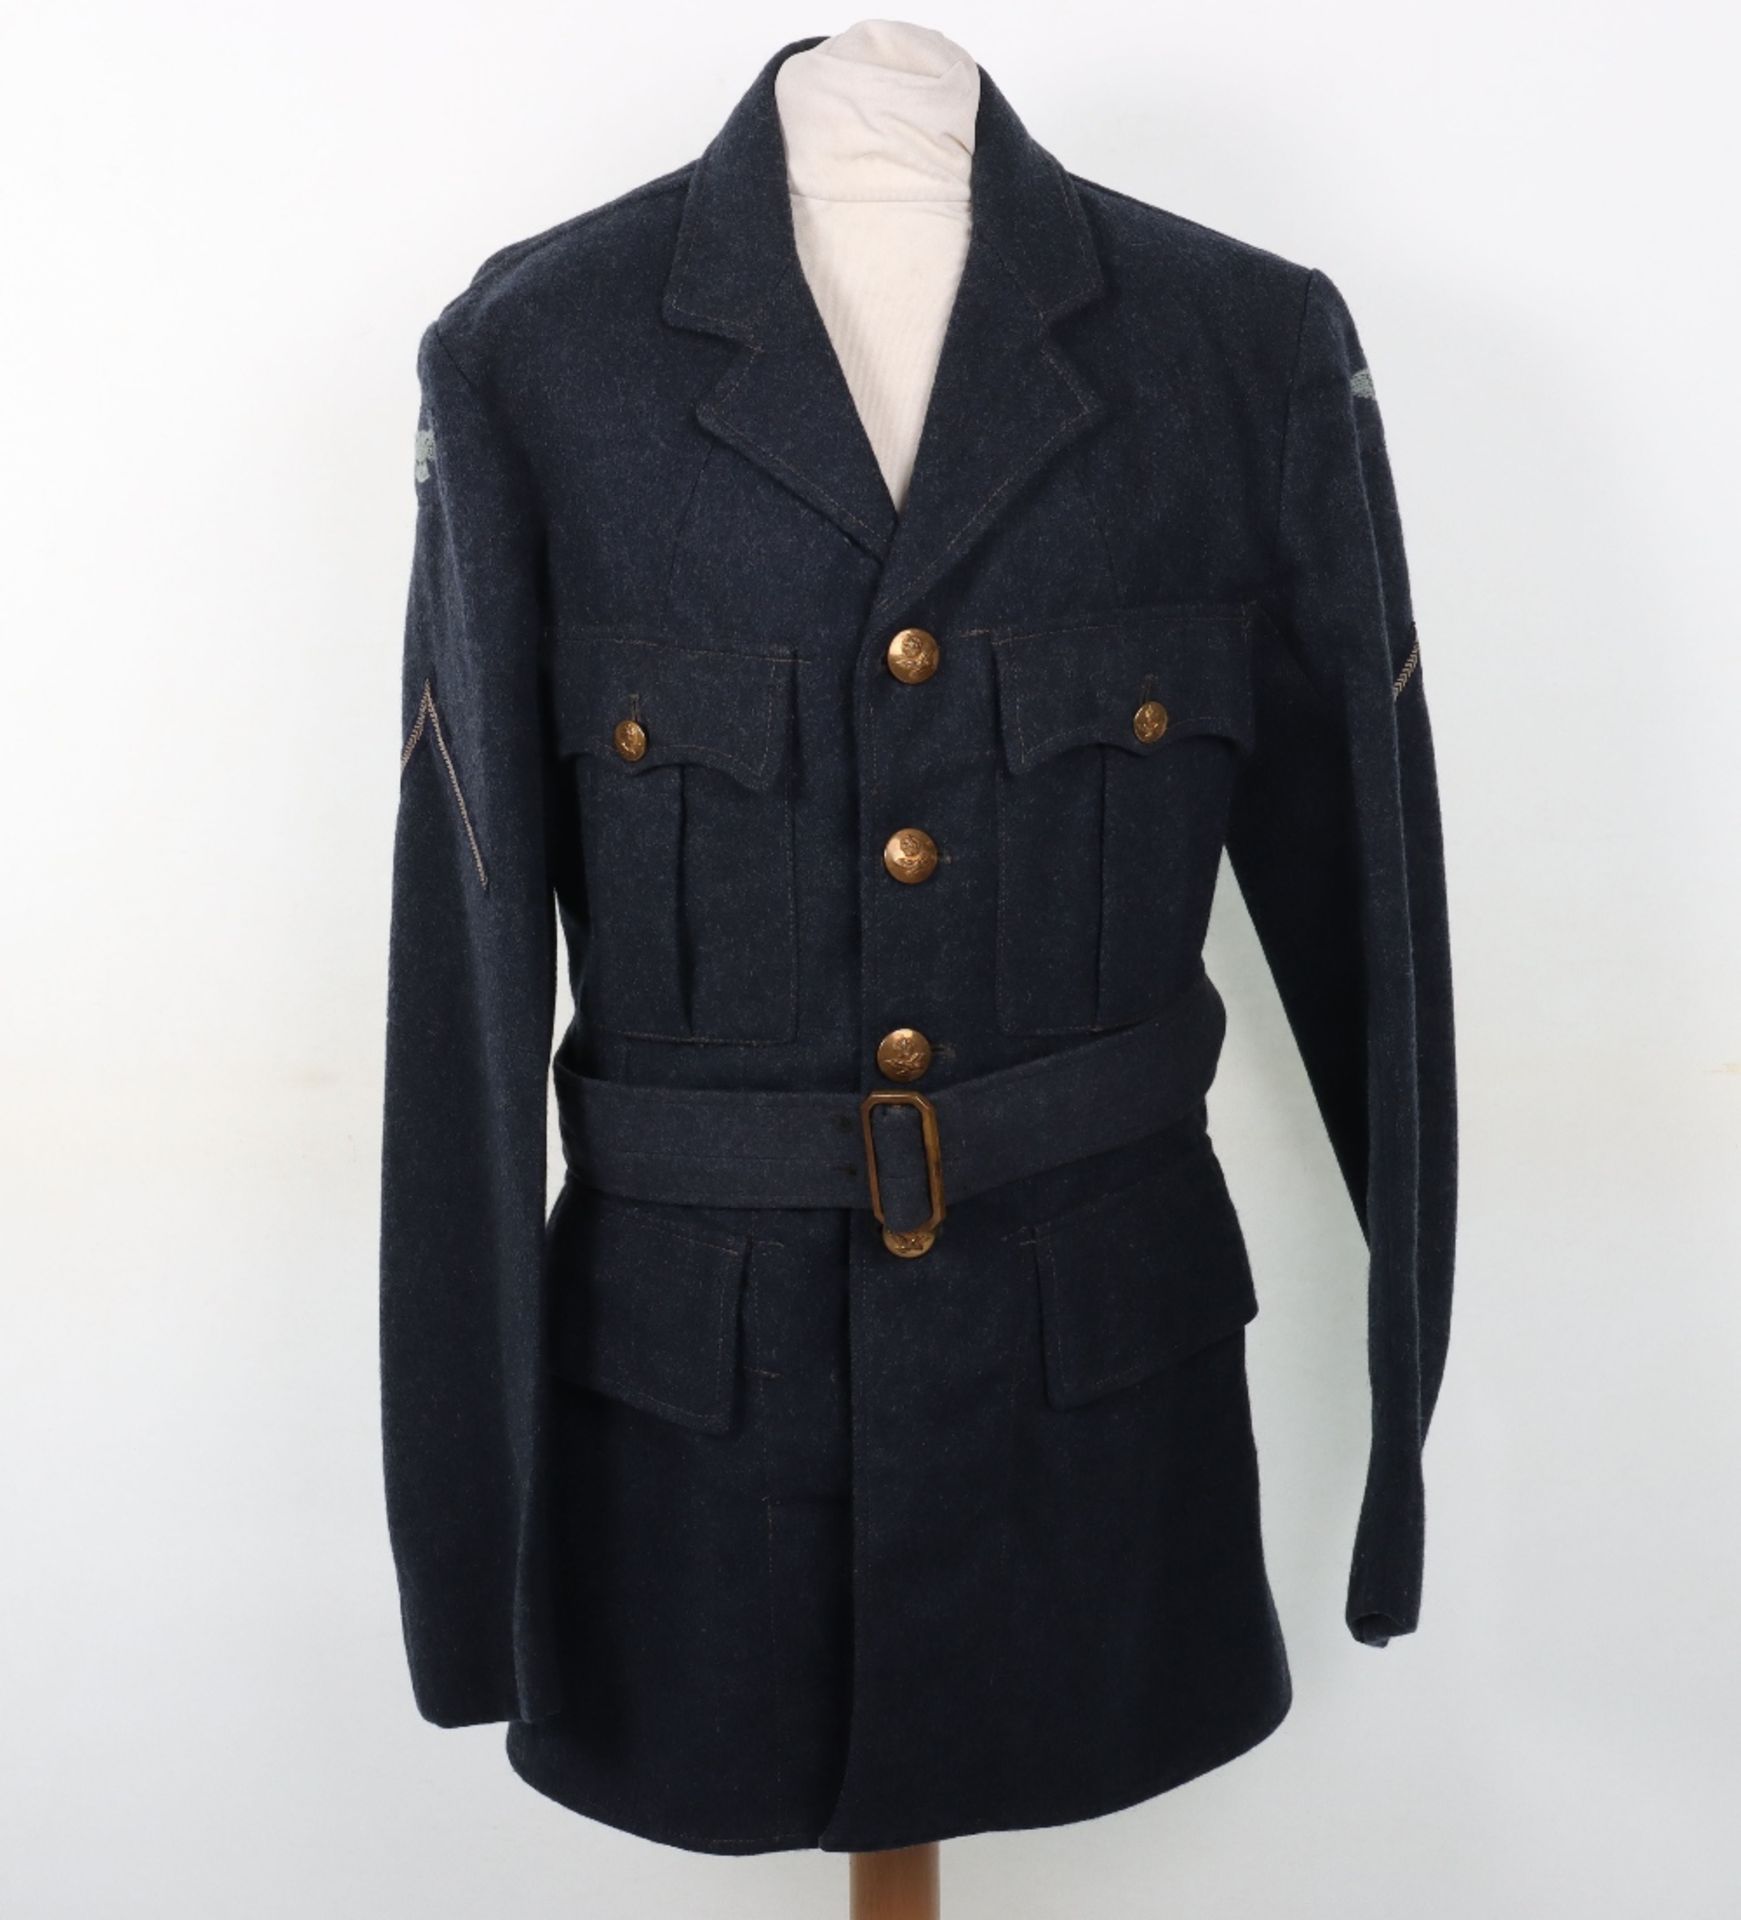 Royal Air Force Service Dress Tunic - Image 10 of 10